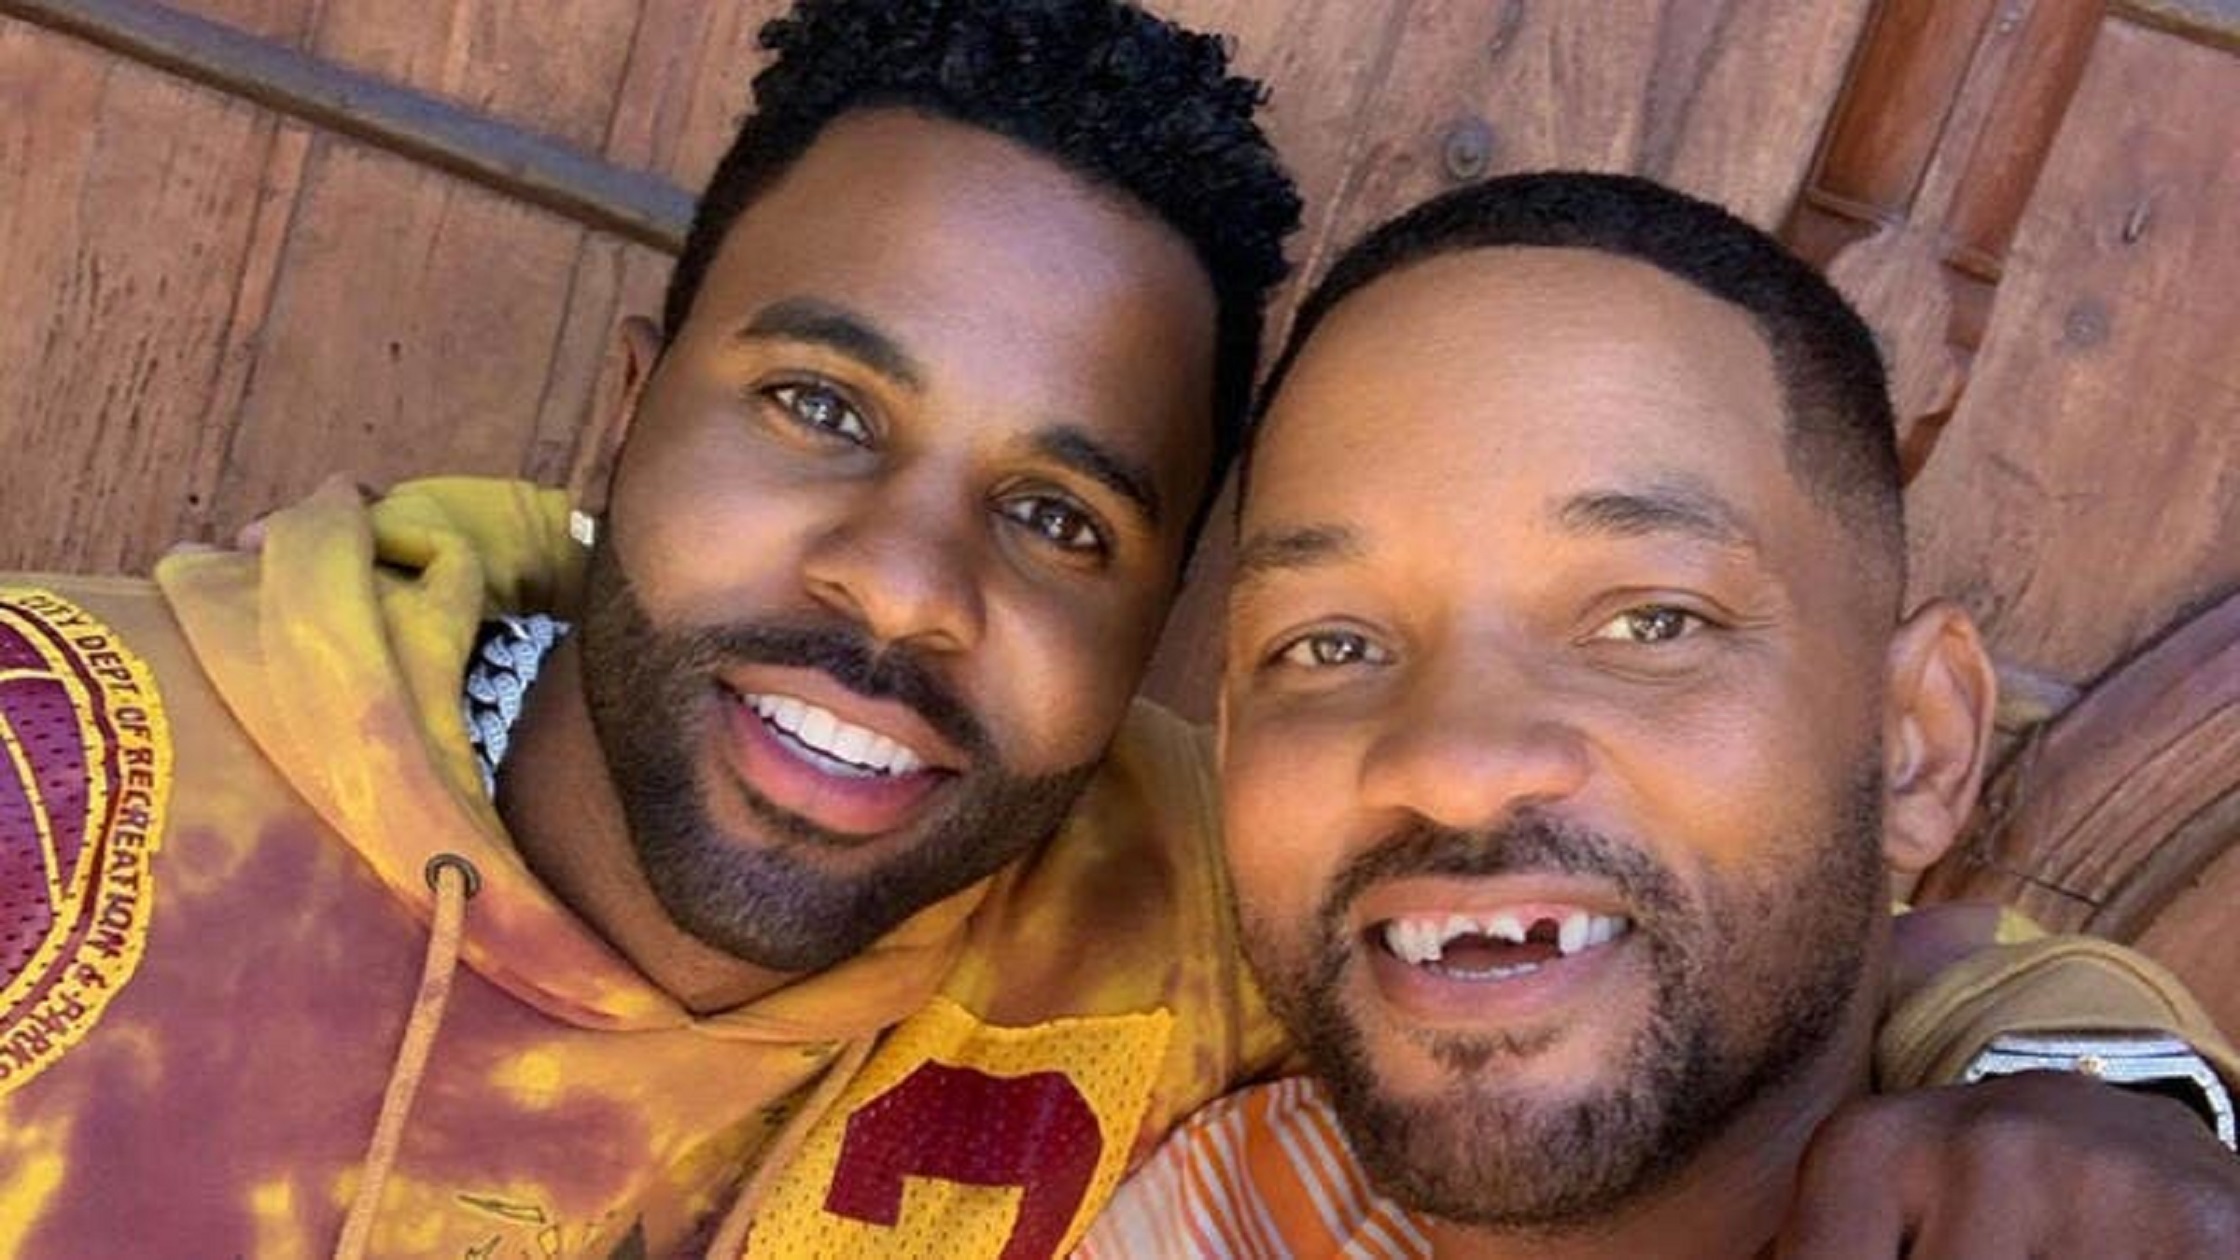 Video: Jason Derulo Knocks Out Will Smith’s Front Teeth With Golf Club